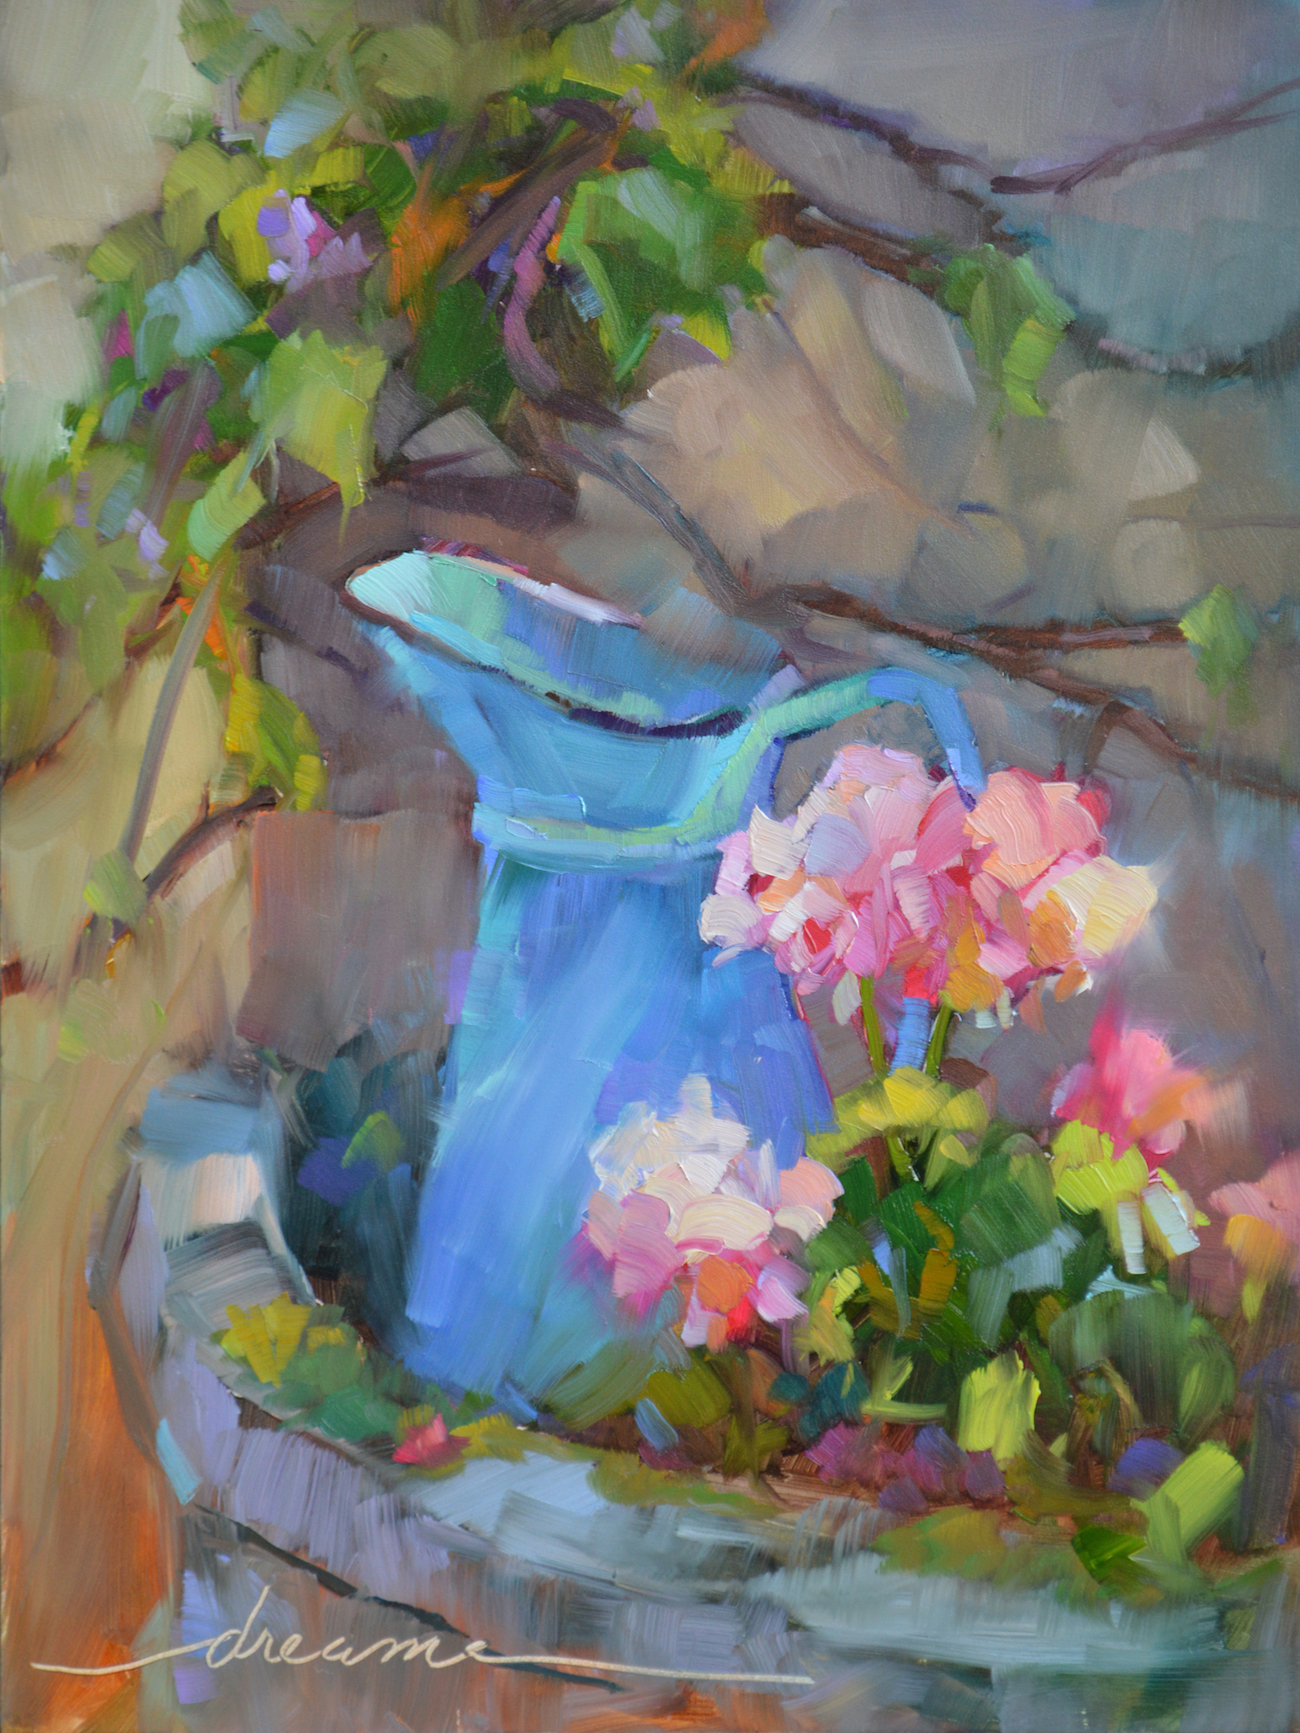 "A Perfectly French Pitcher" Artist Dreama Tolle Perry @ DreamaTollePerry.com